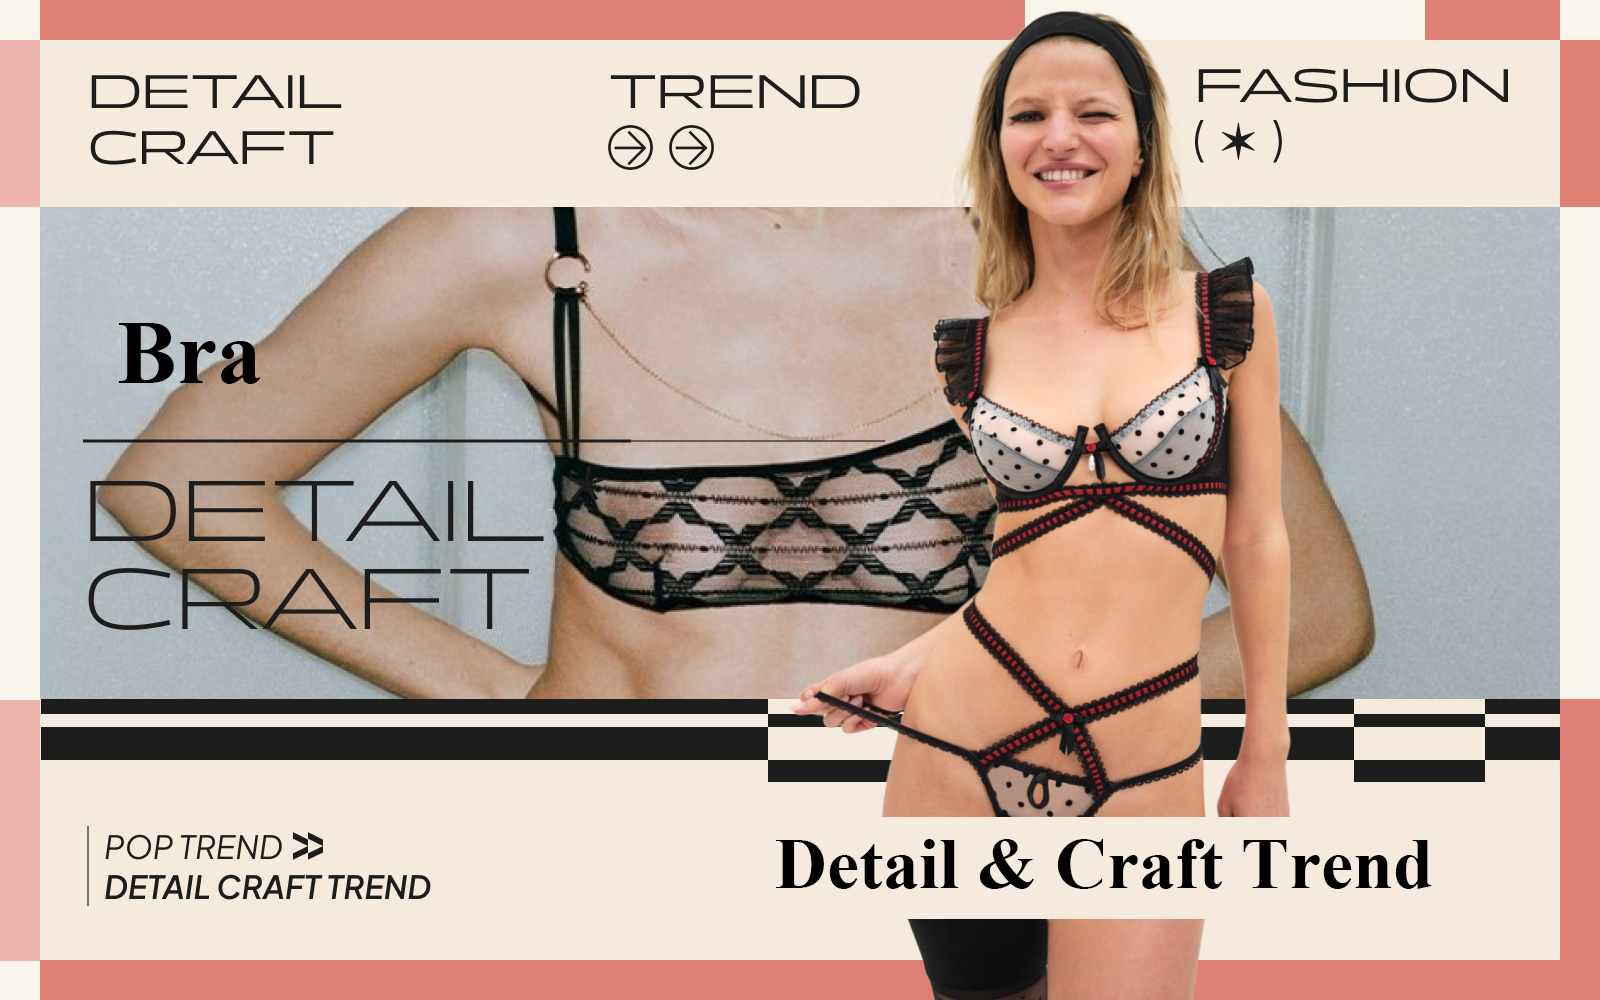 The Detail & Craft Trend for Women's Bra